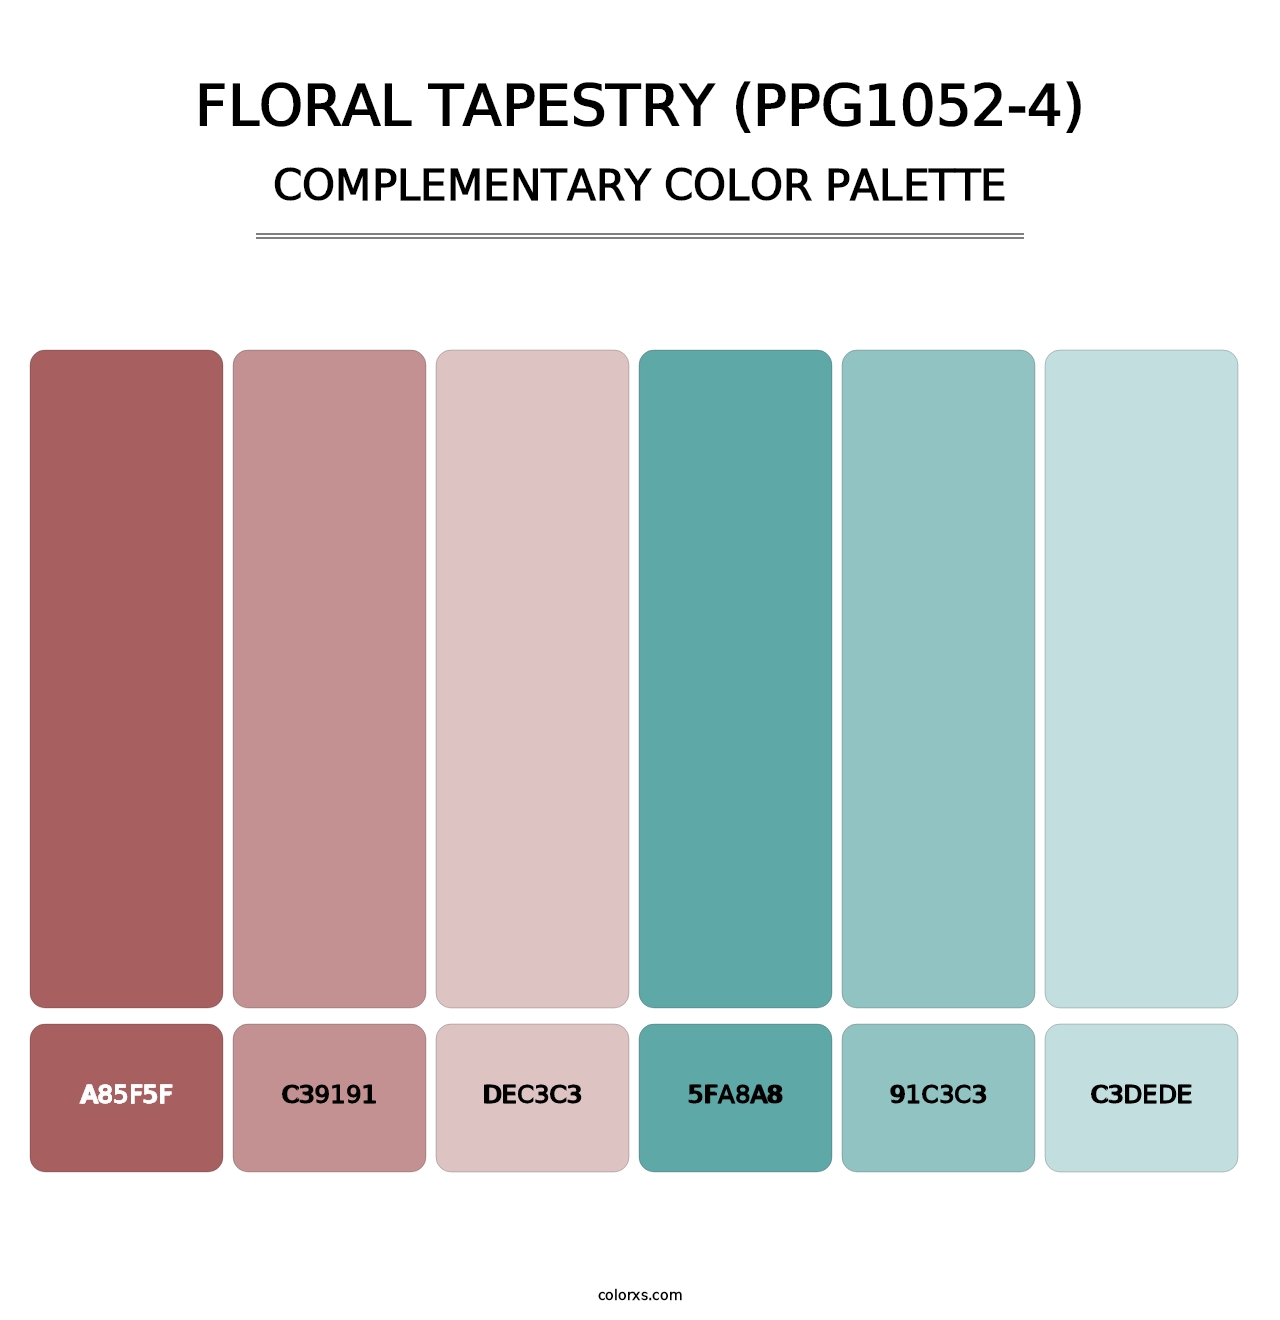 Floral Tapestry (PPG1052-4) - Complementary Color Palette